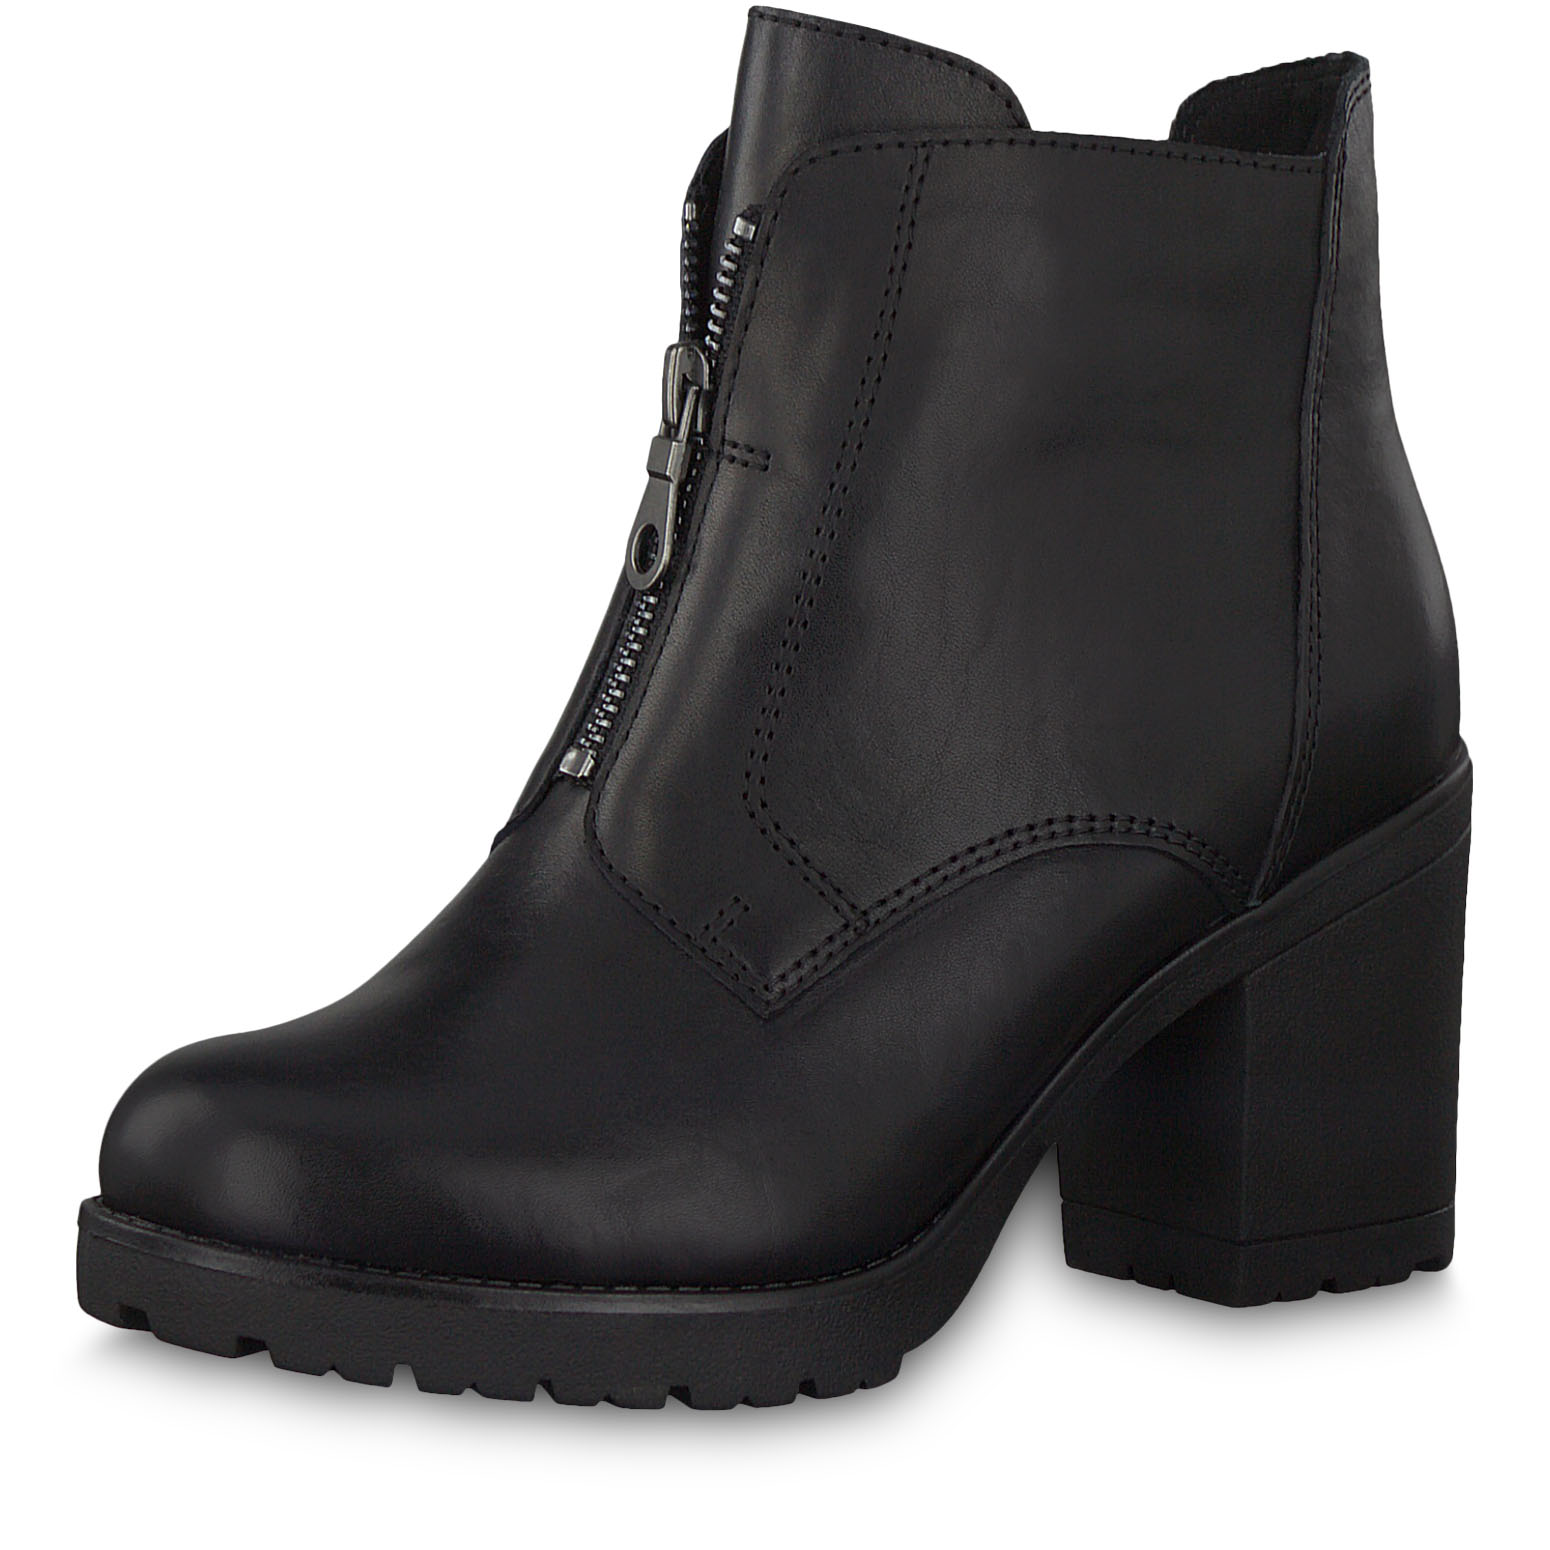 Leather Bootie warm lining